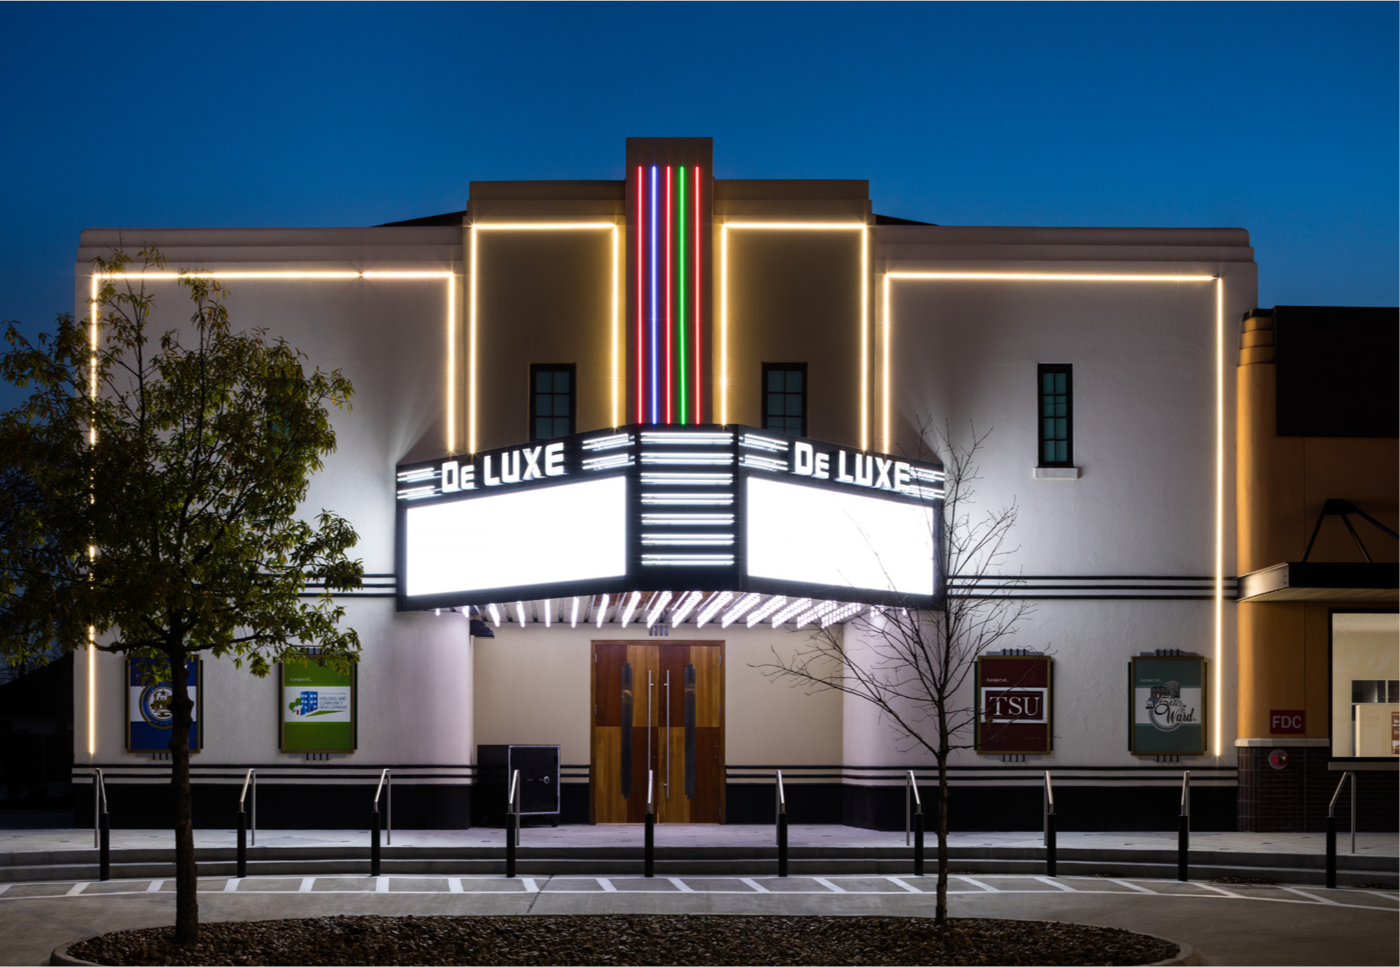 Exterior of DeLuxe Theater. Depicts the theater lights on. The marquee is blank and the name De LUXE is illuminated above it.